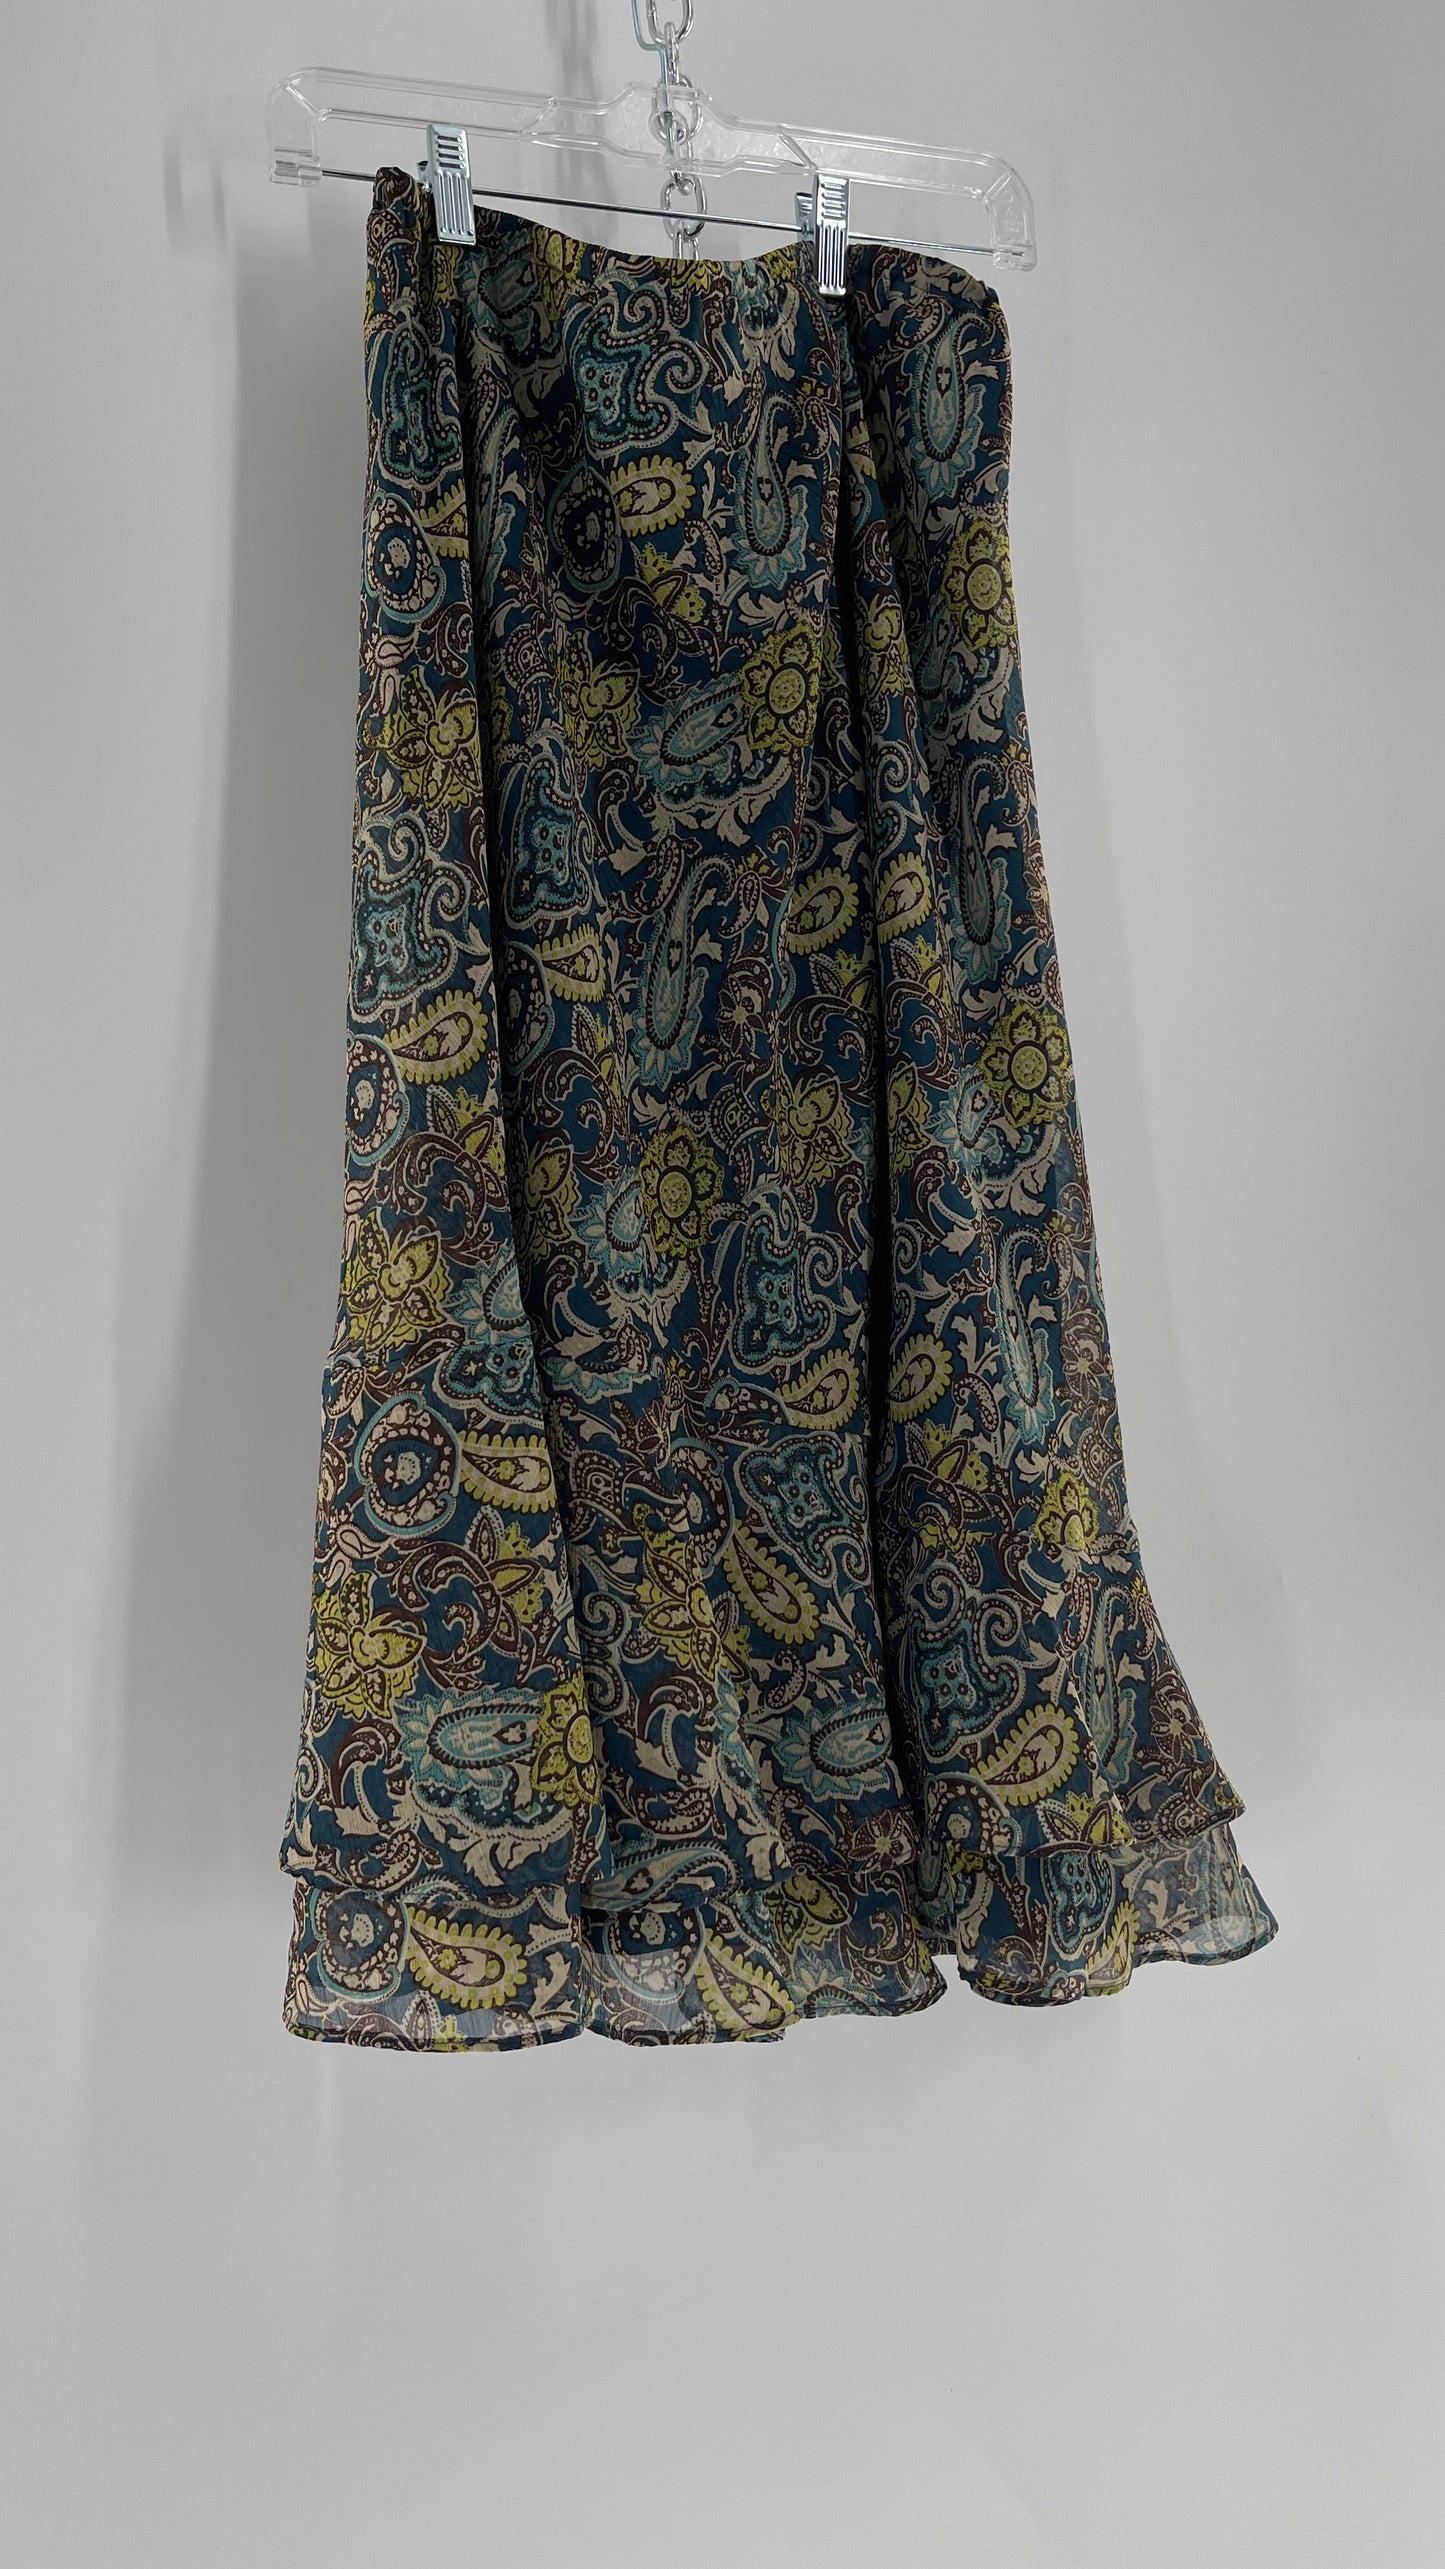 Vintage Paisley Brown/Blue/Green Skirt with Double Hem (16)